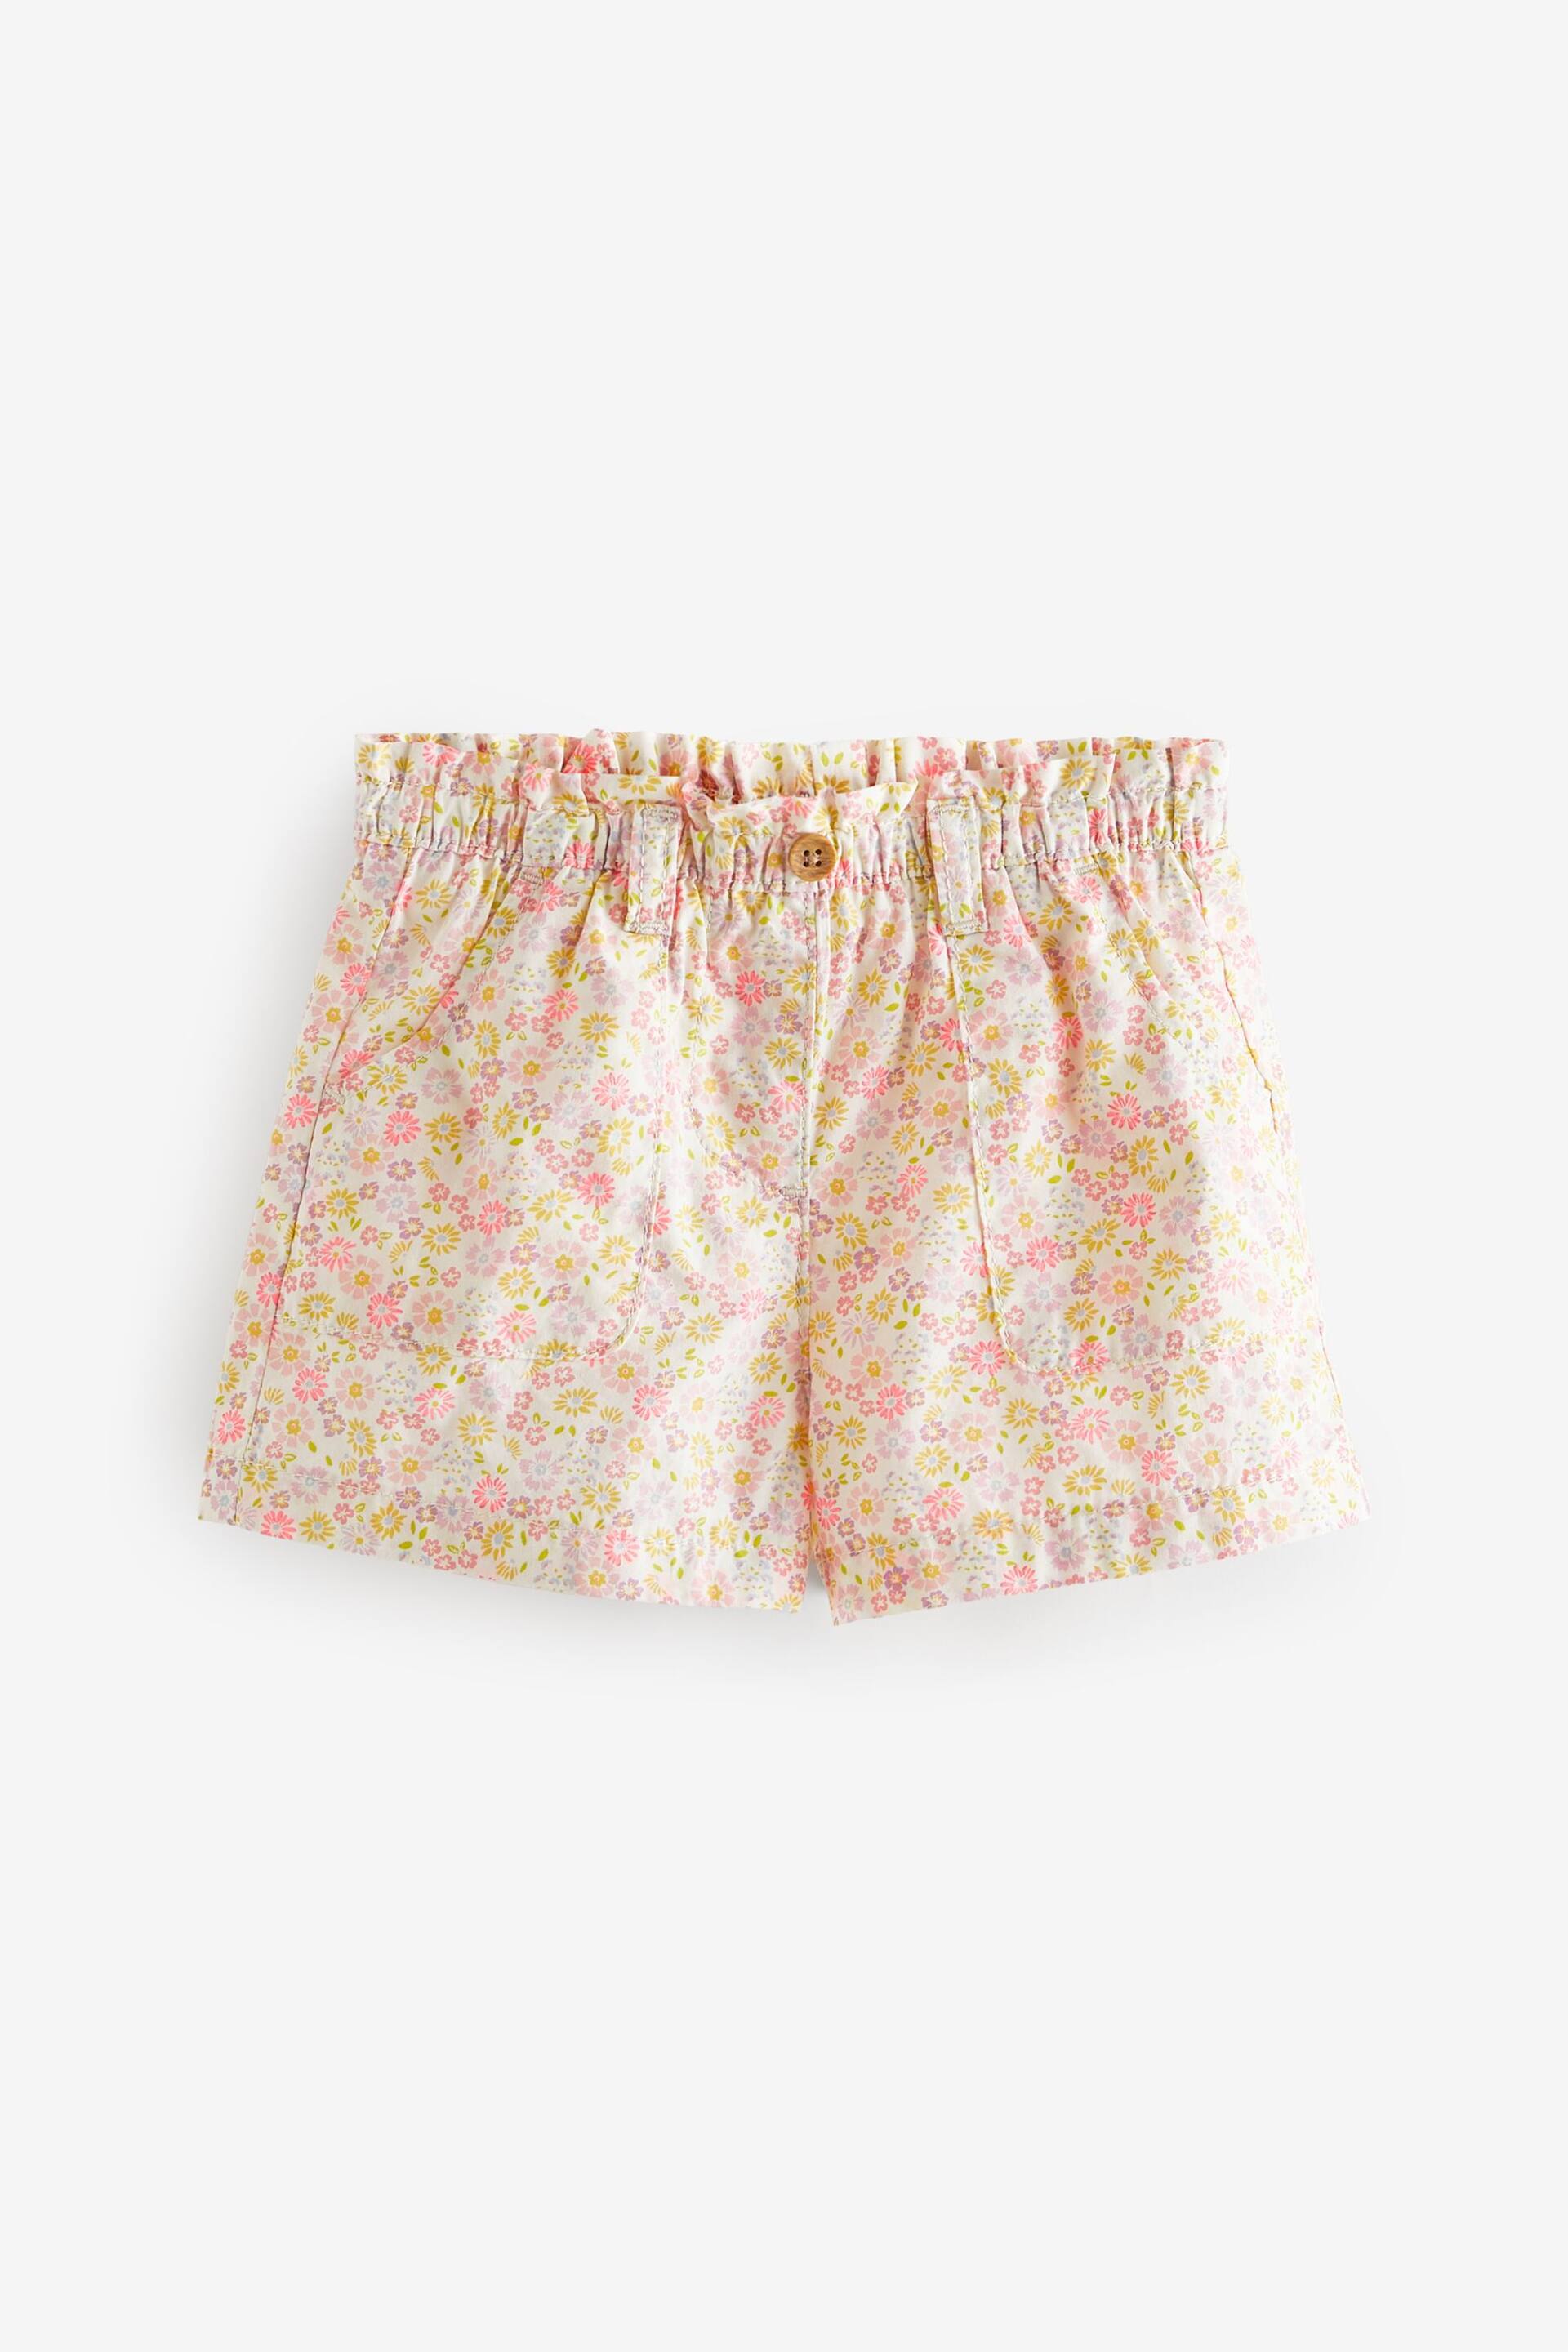 Pink Floral Print Pull-On Shorts (3mths-7yrs) - Image 5 of 7